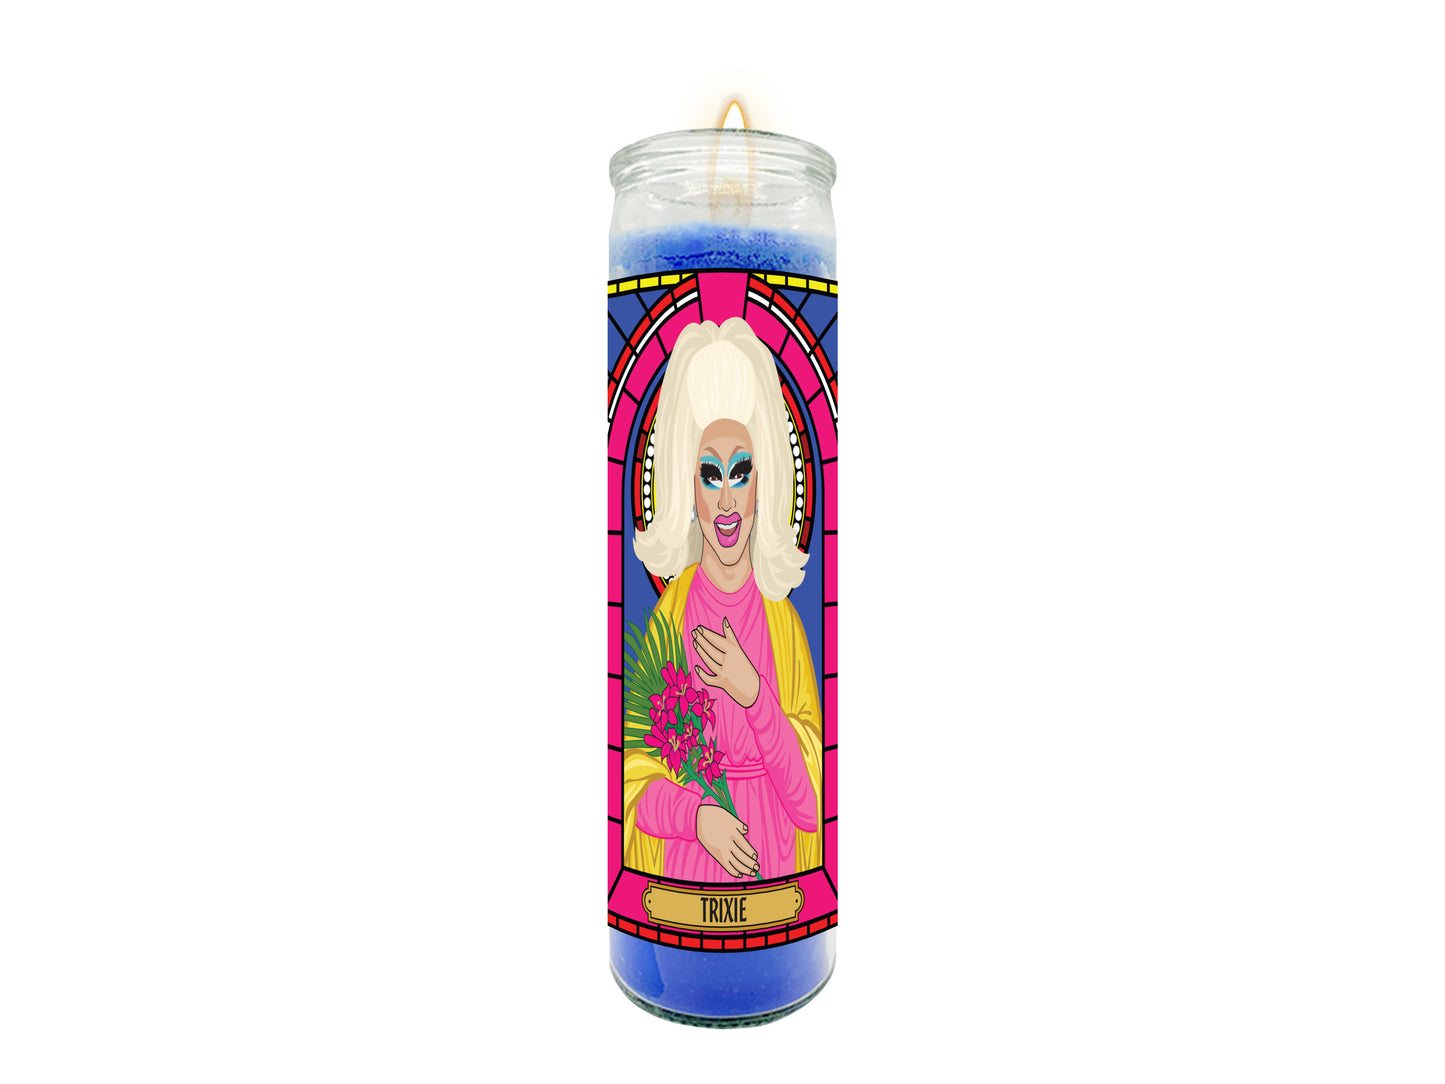 Trixie Mattel Illustrated Prayer Candle